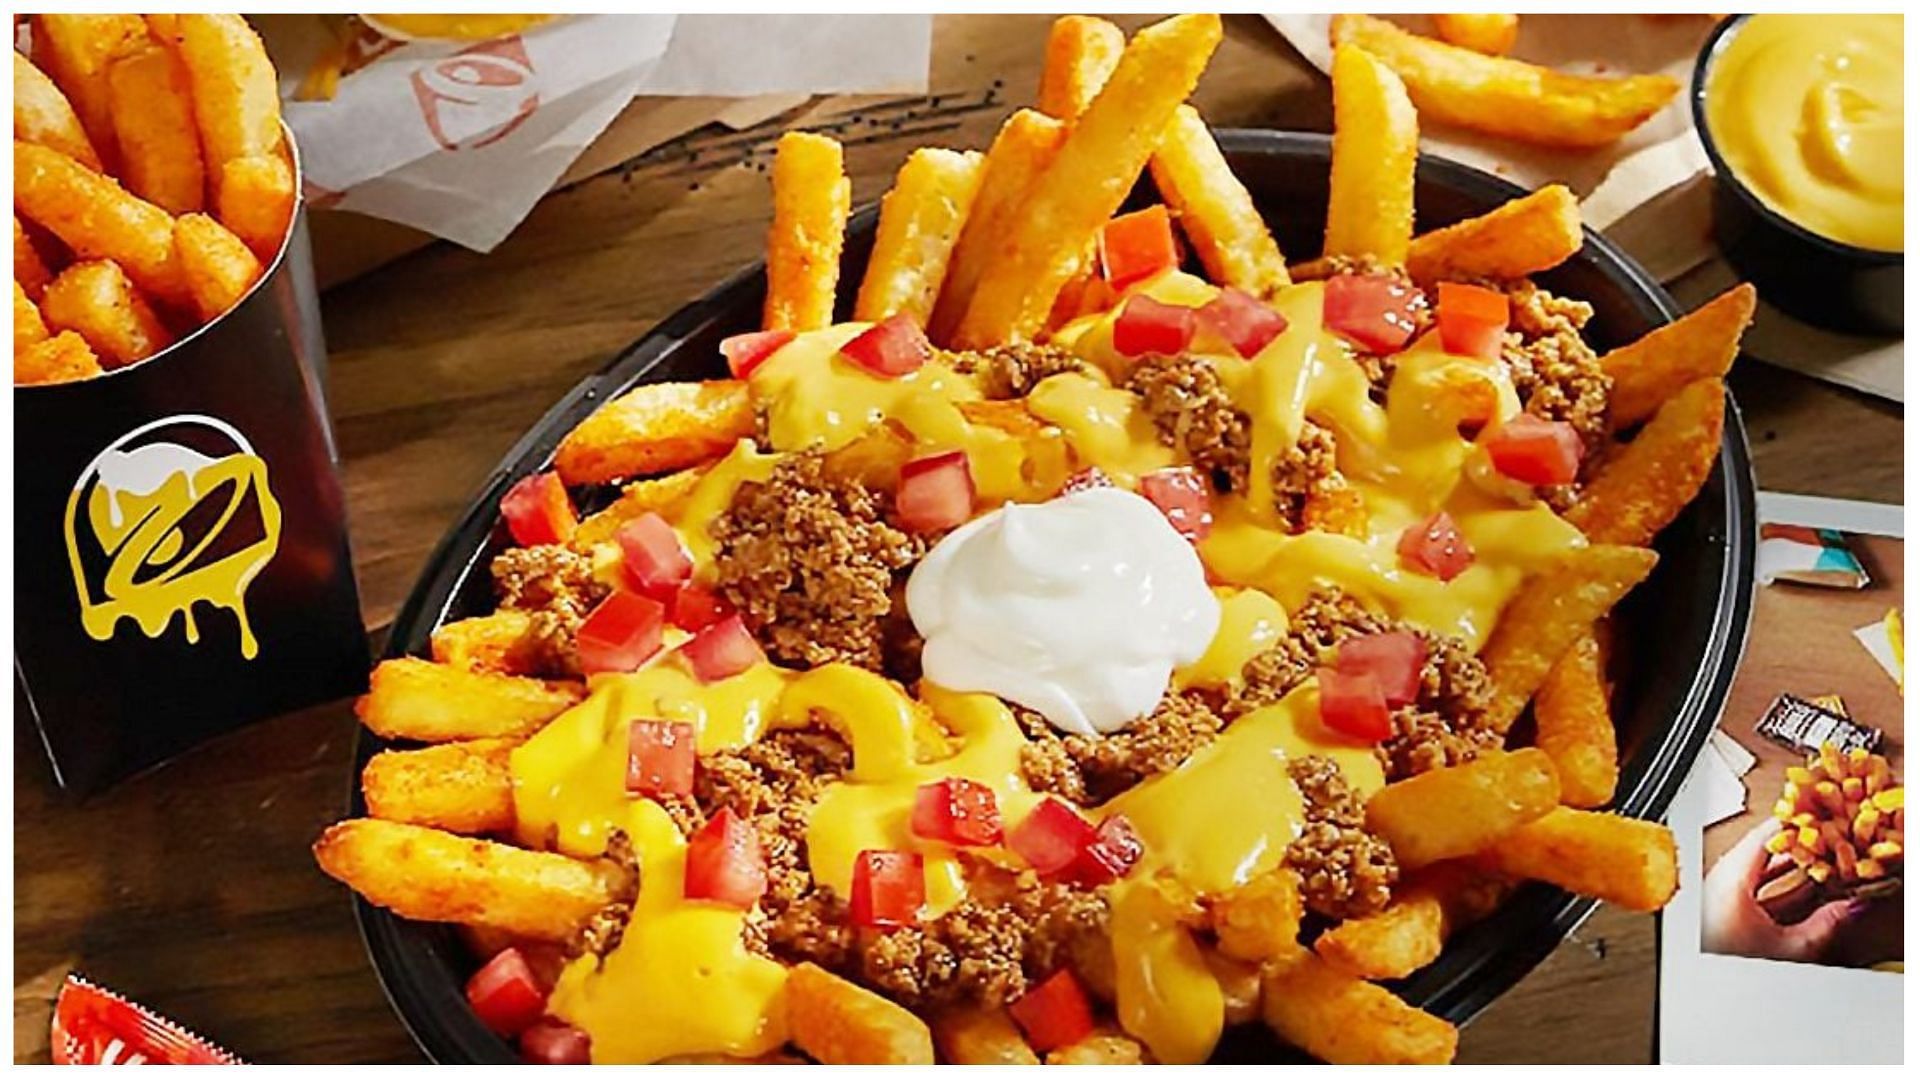 Taco Bell 7Layer Nacho Fries Availability, ingredients, price, and